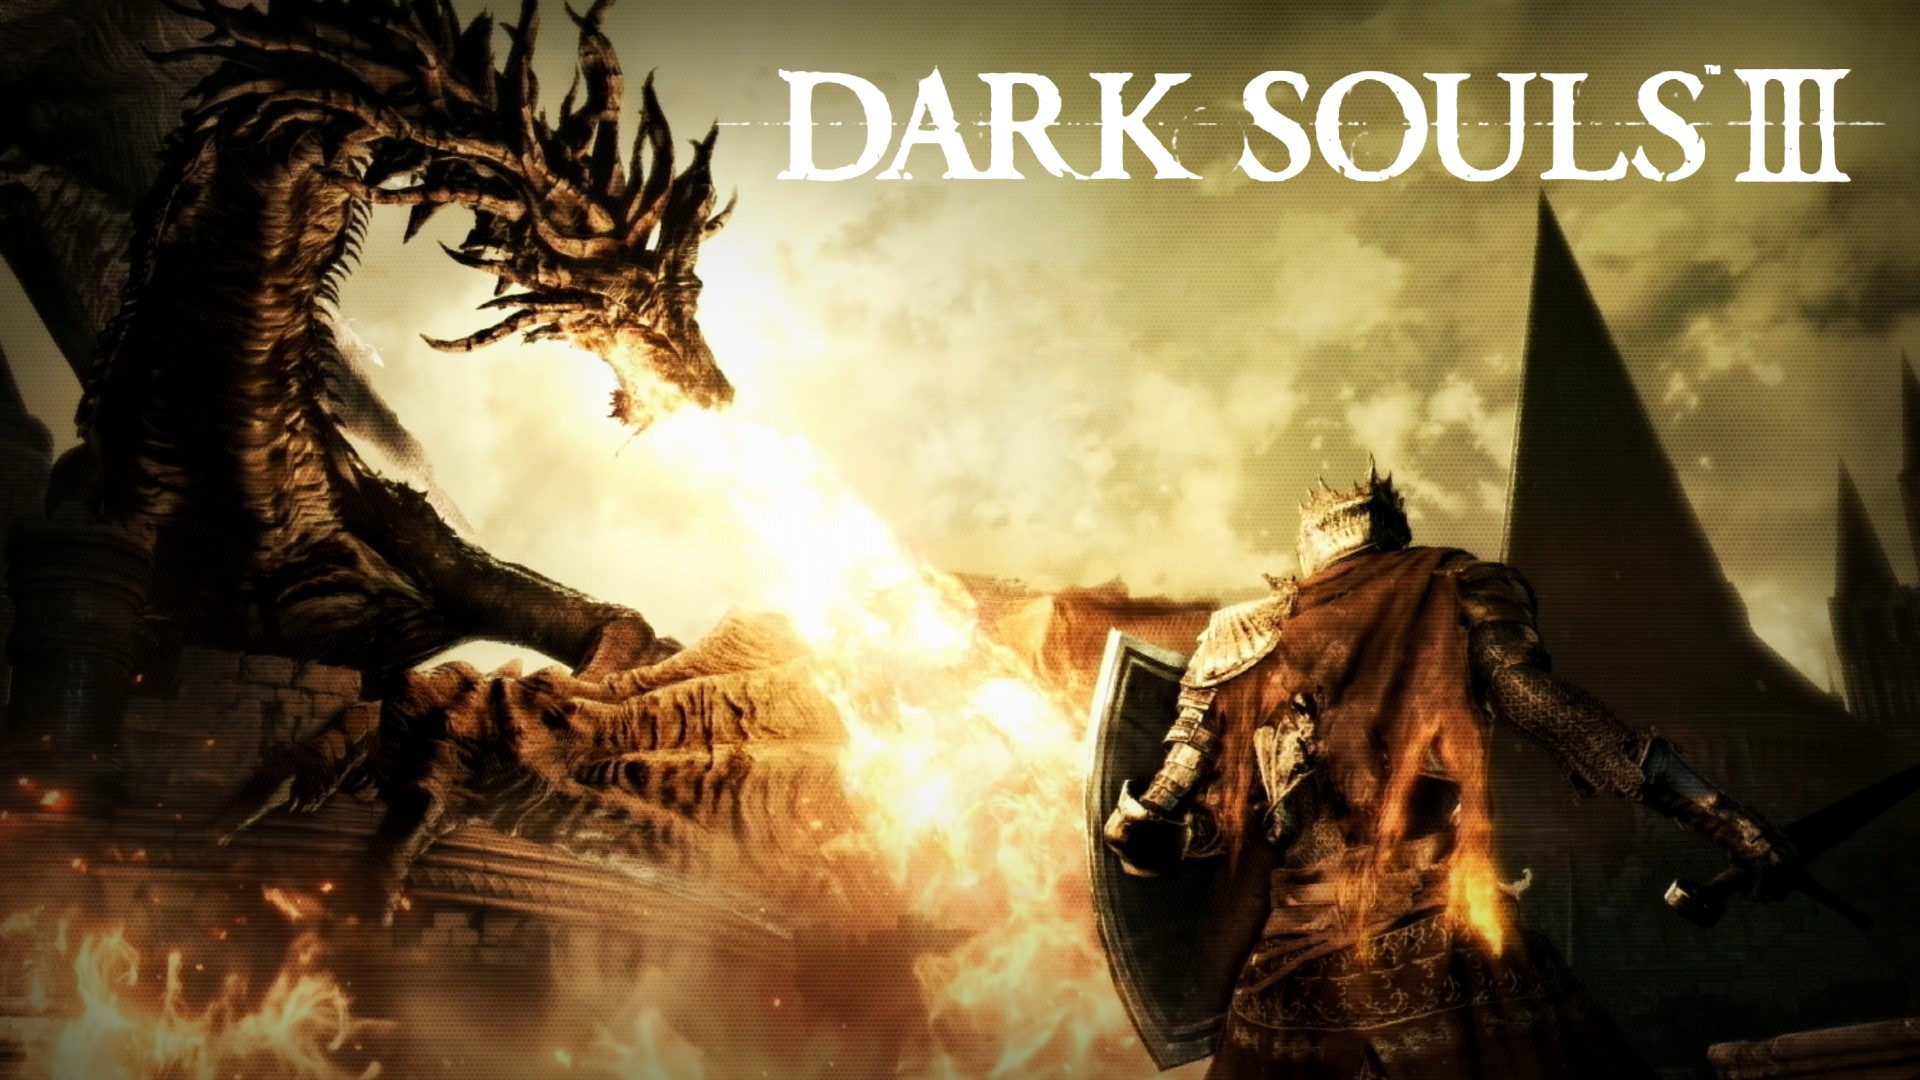 1920x1080 29 2015 By Stephen Comments Off on Dark Souls 3 HD Wallpaper 